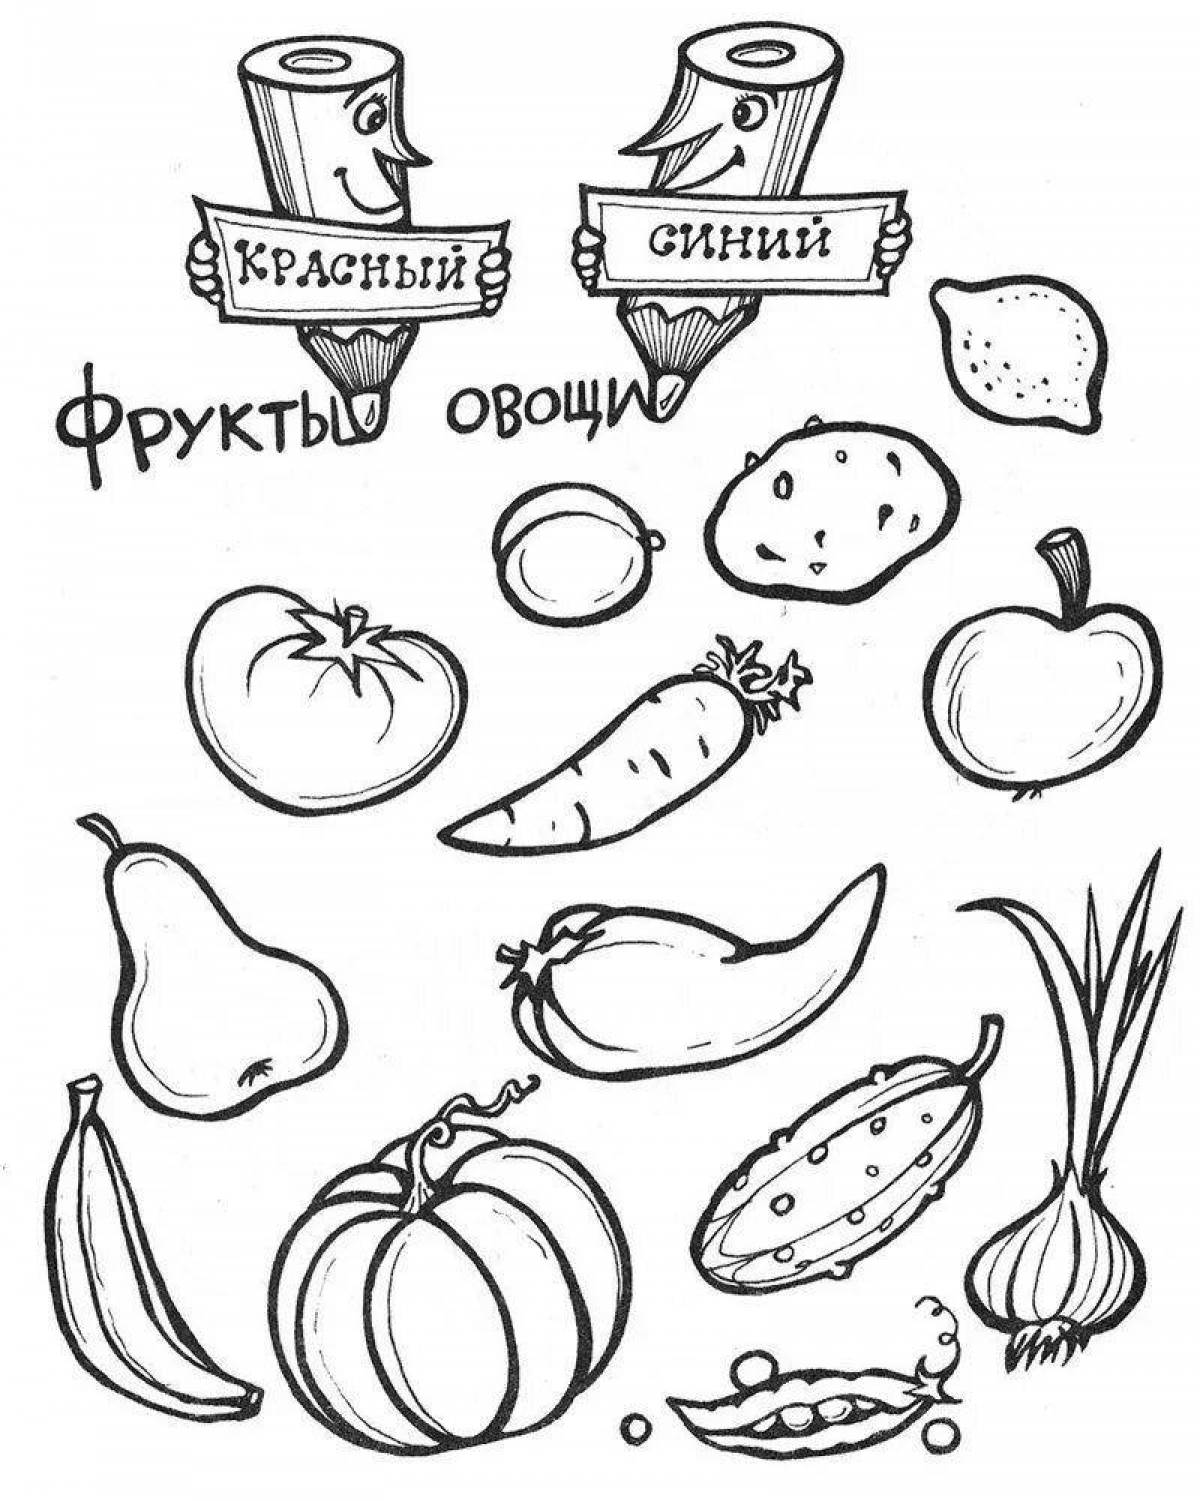 Fun vegetable and fruit coloring pages for kids